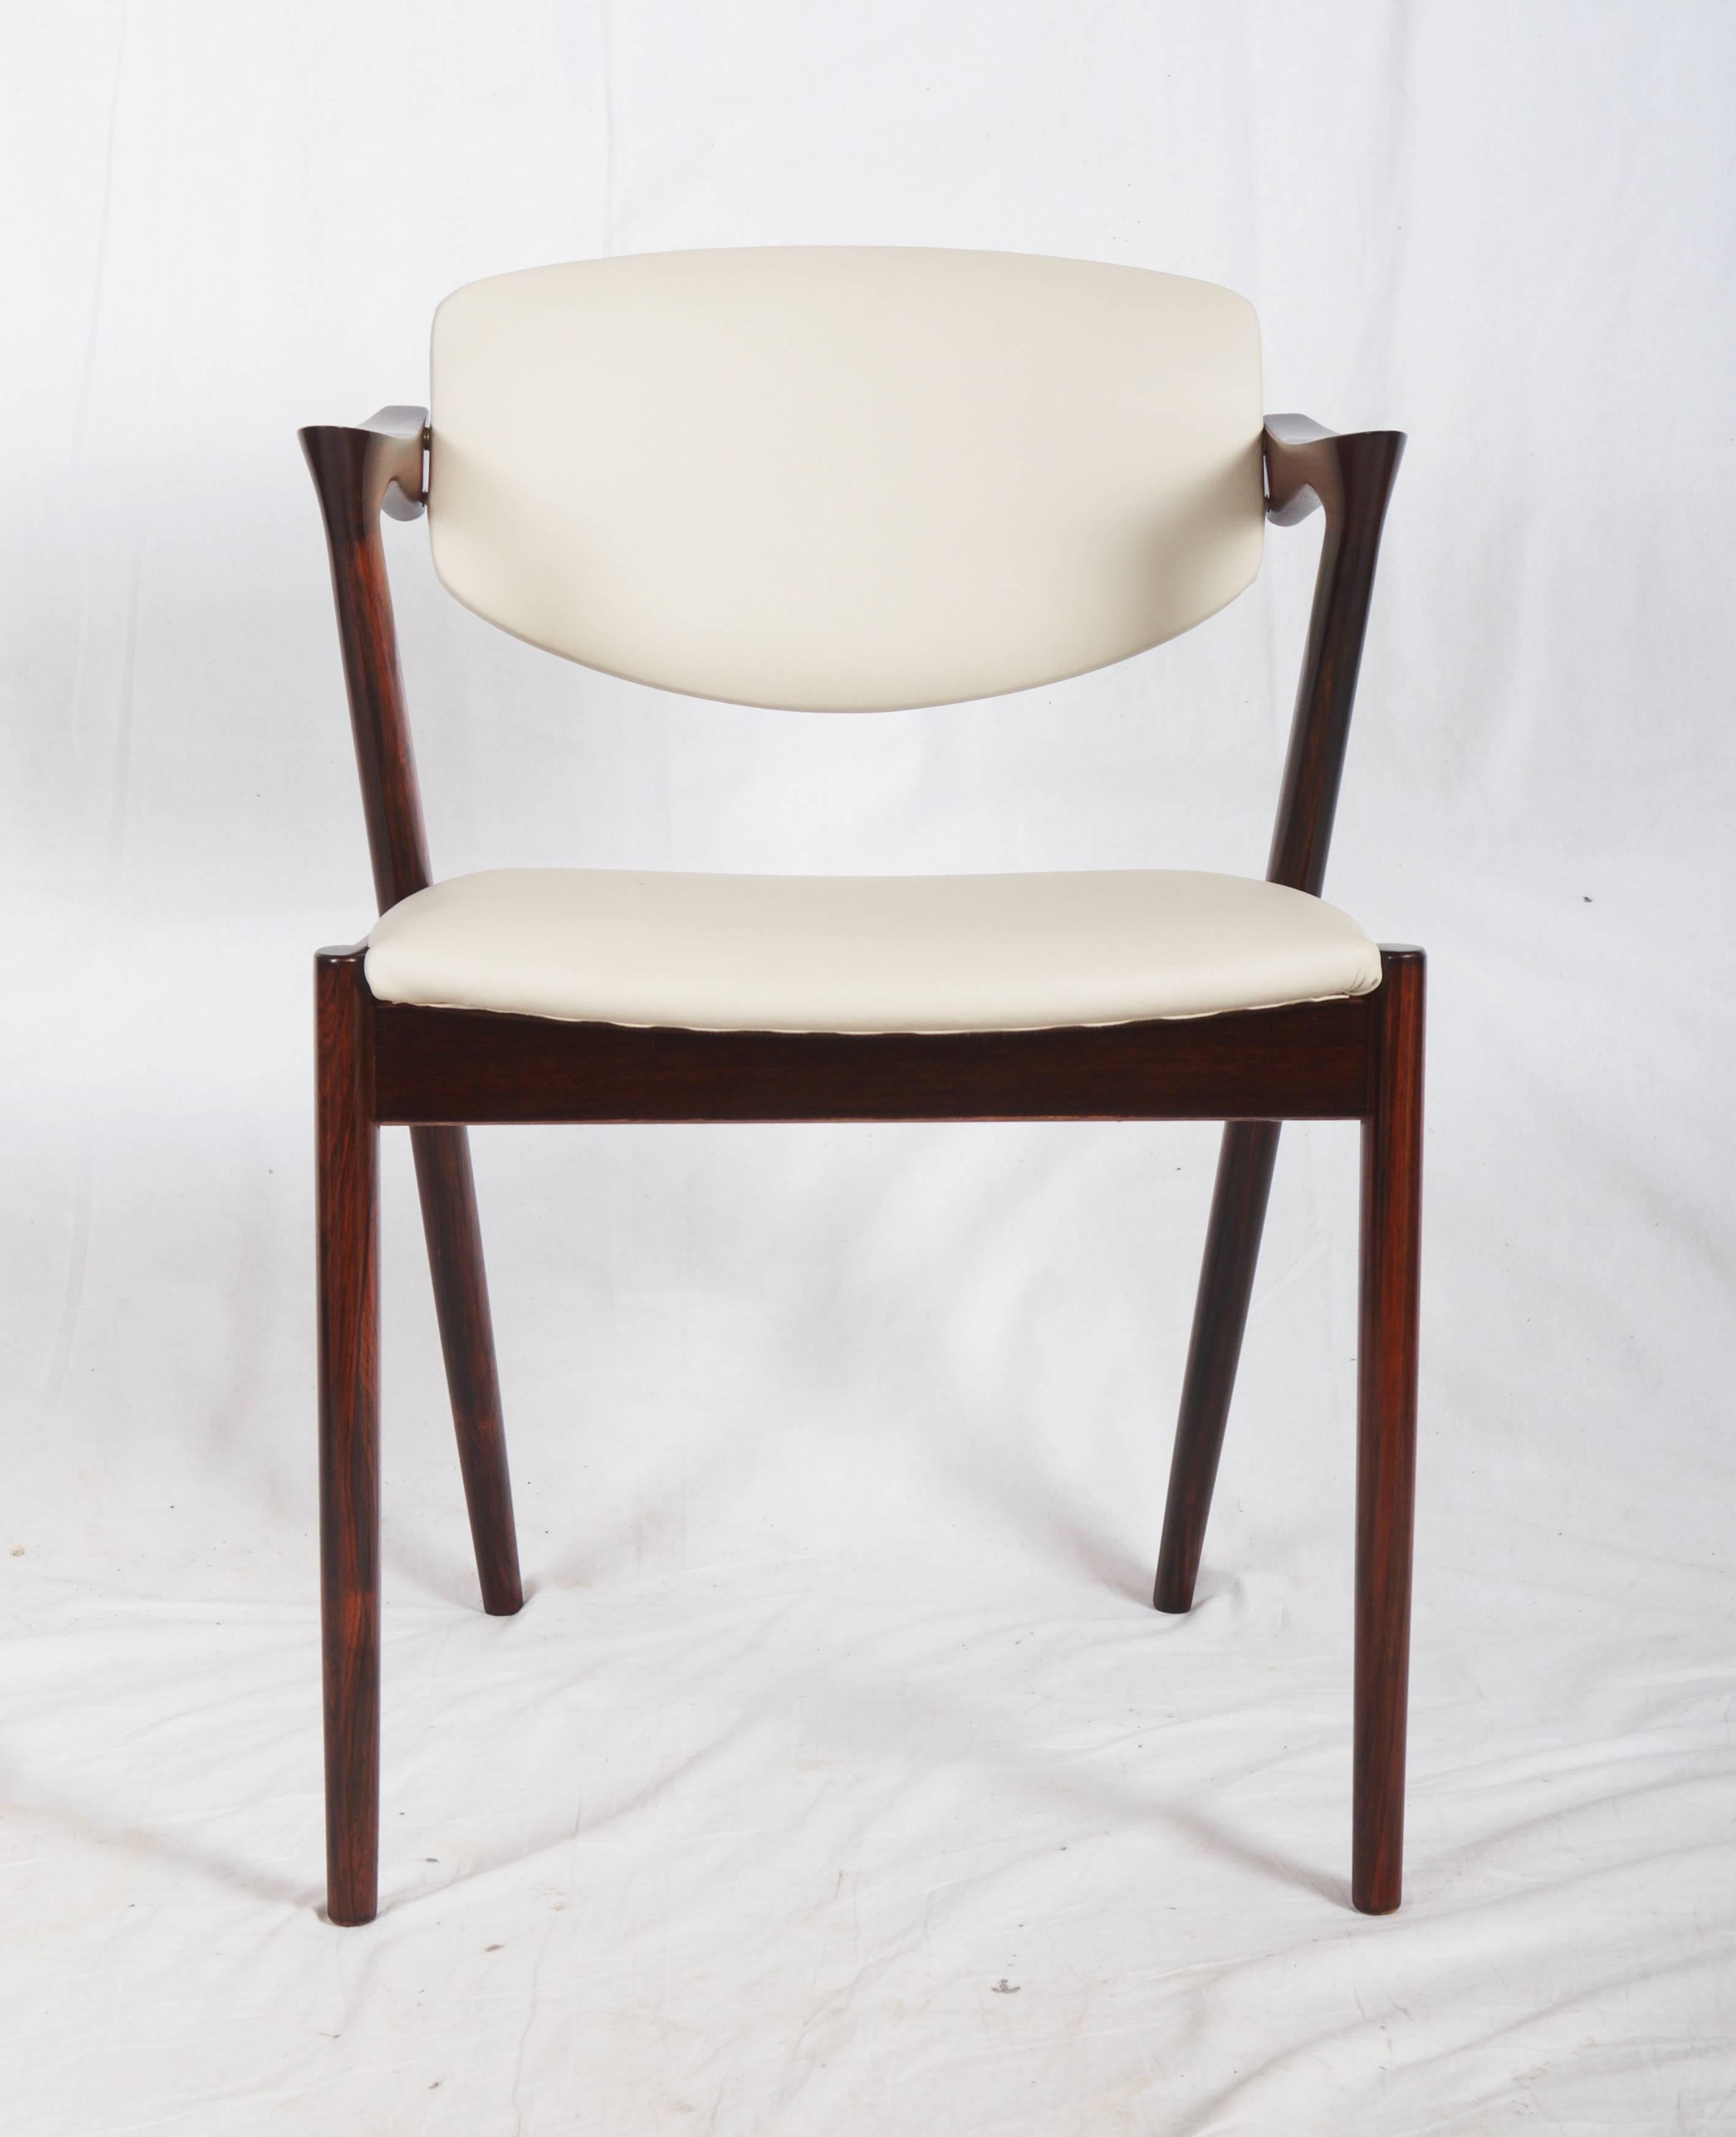 Scandinavian Modern Hardwood and Leather Chairs by Kai Kristiansen Model 42 For Sale